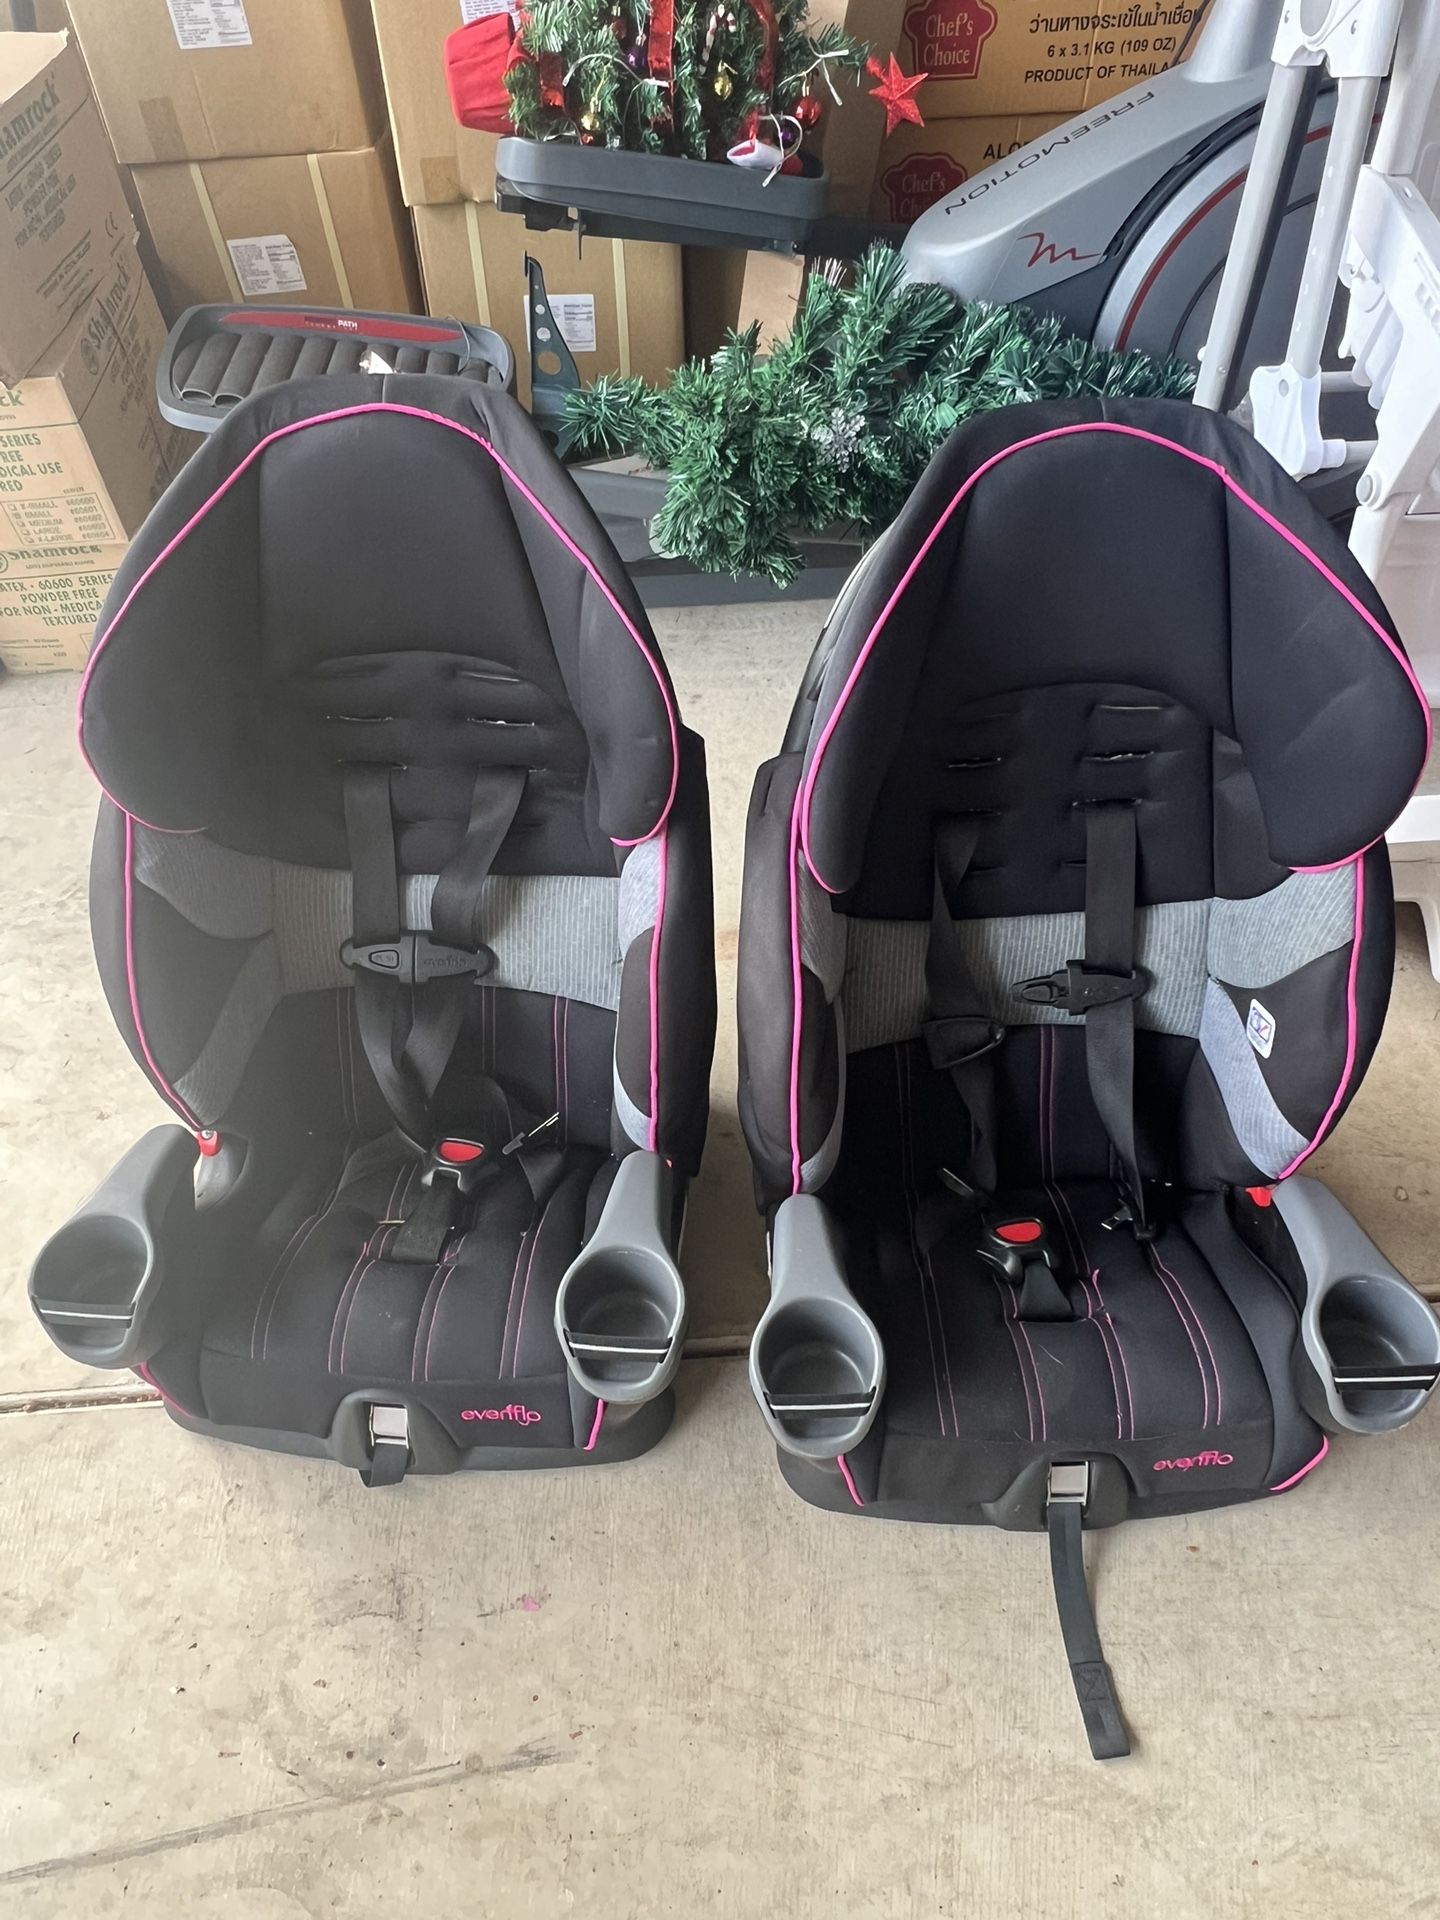 4 Car Seat And 1 High Chair 